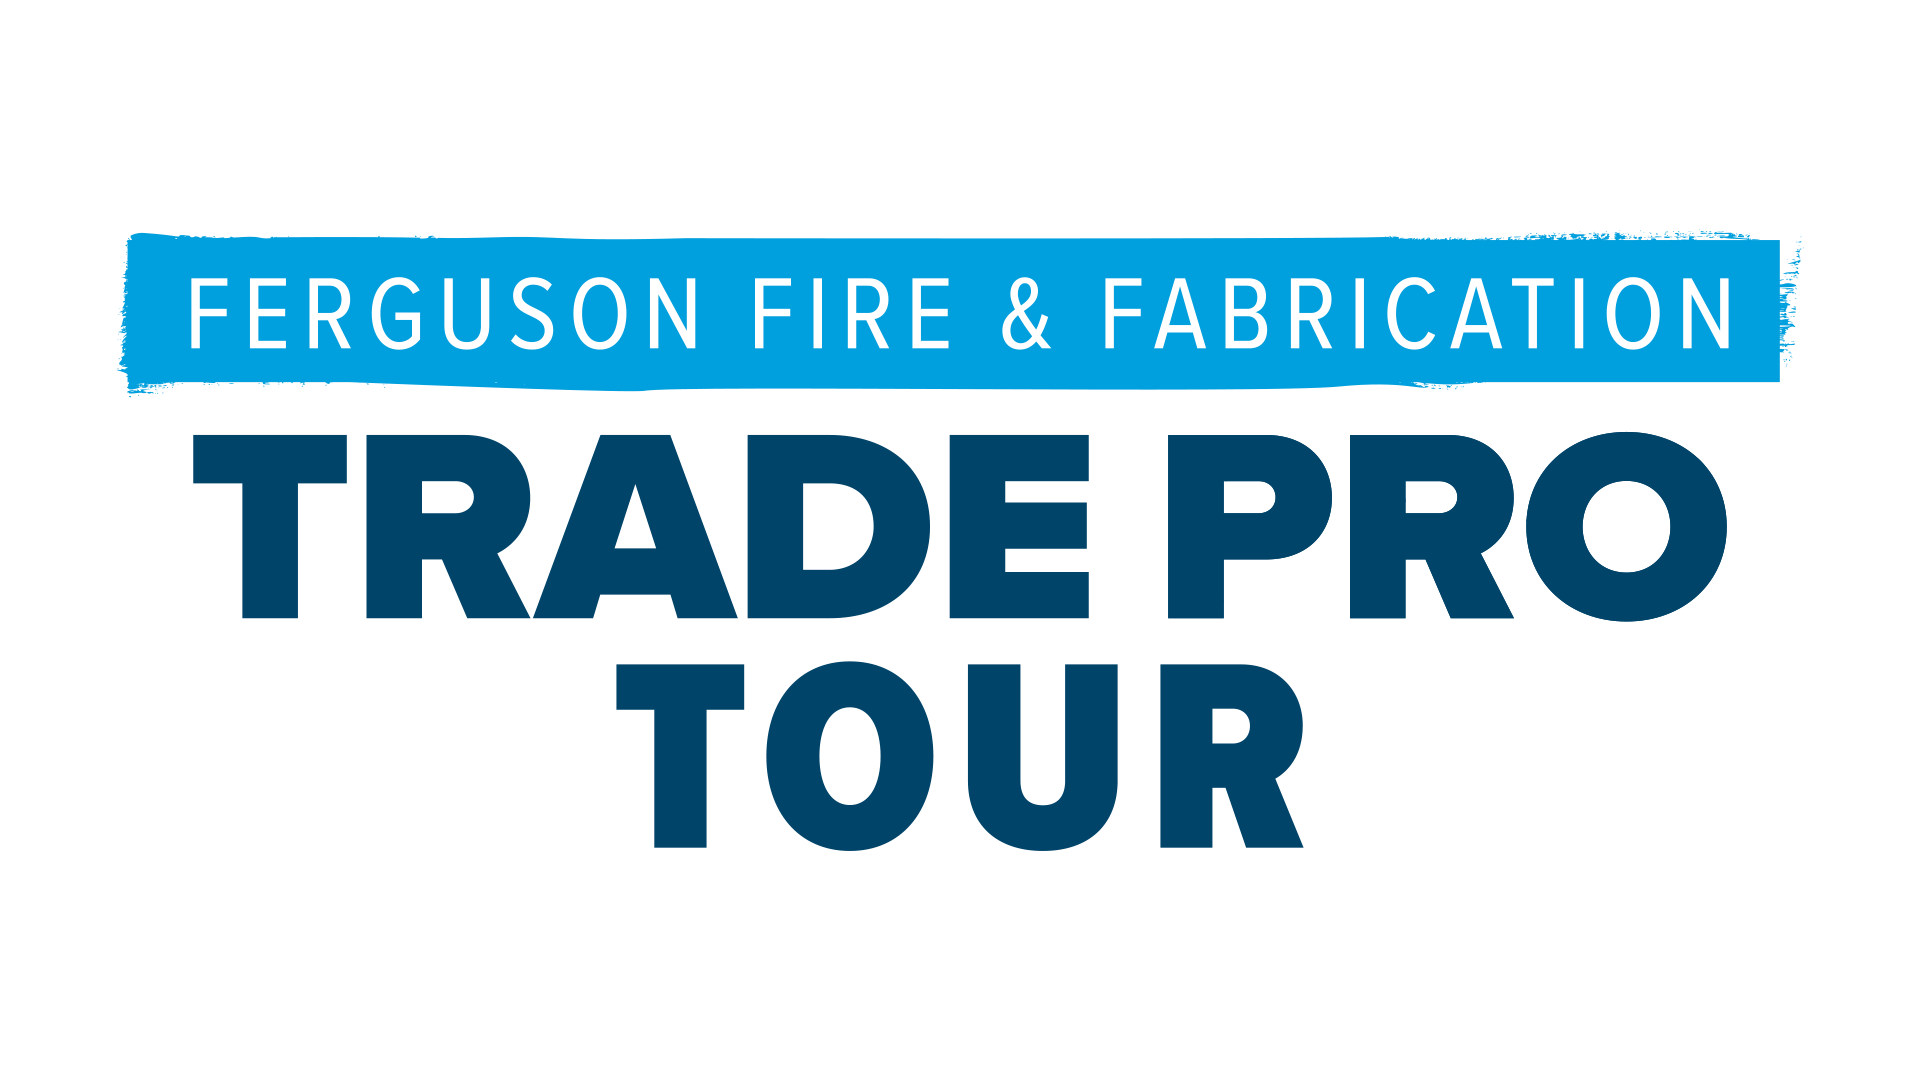 Ferguson Fire & Fabrication in white text against a light blue background over Trade Pro Tour written in dark blue text.